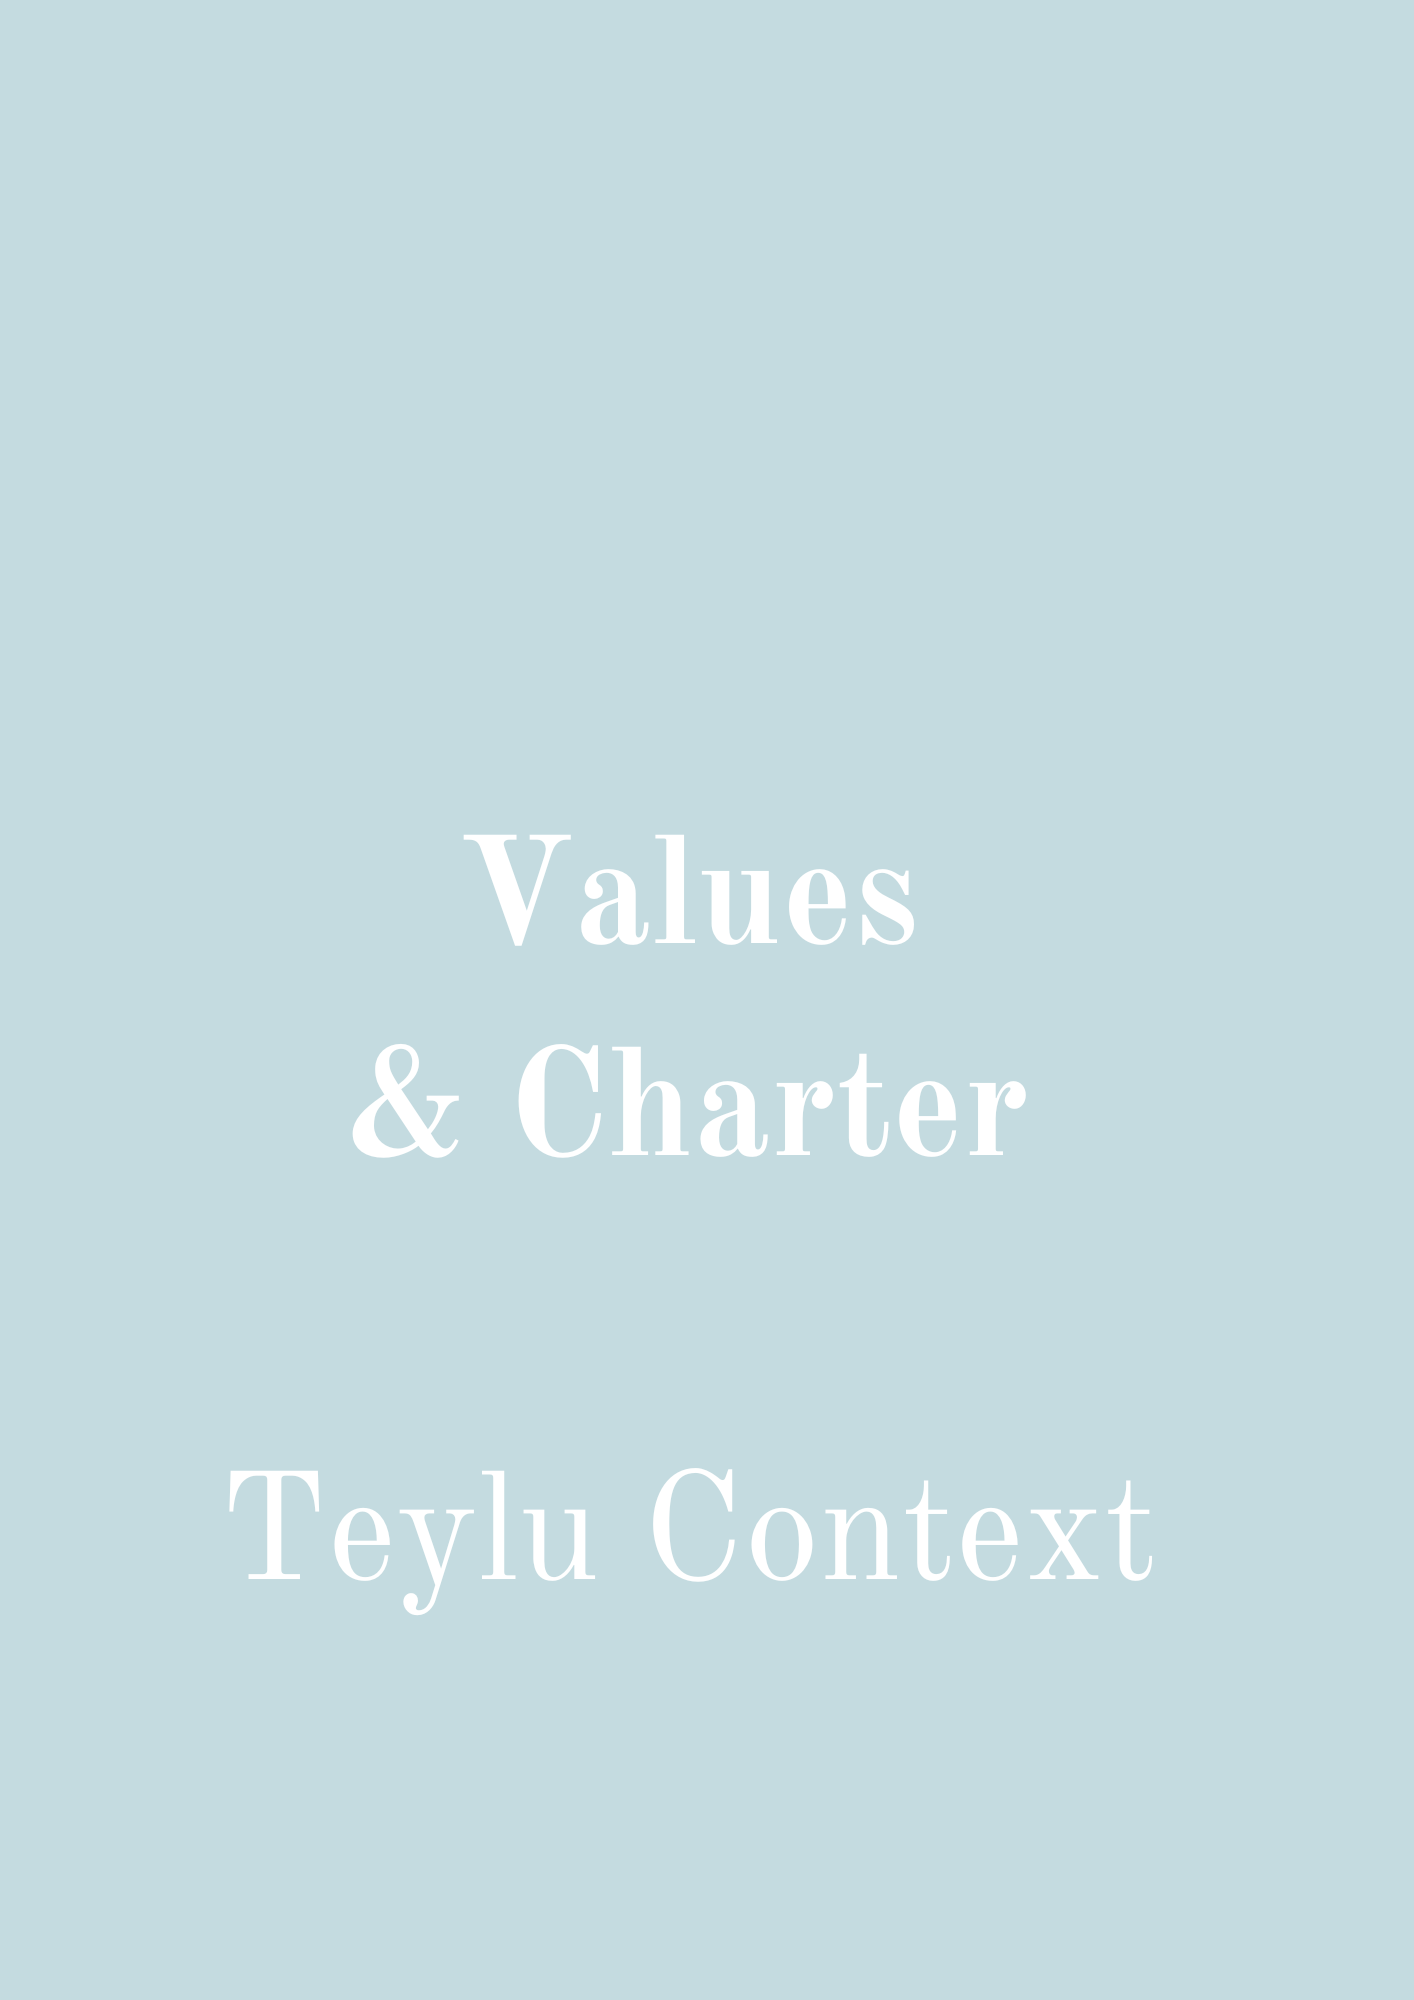 Values & Charter